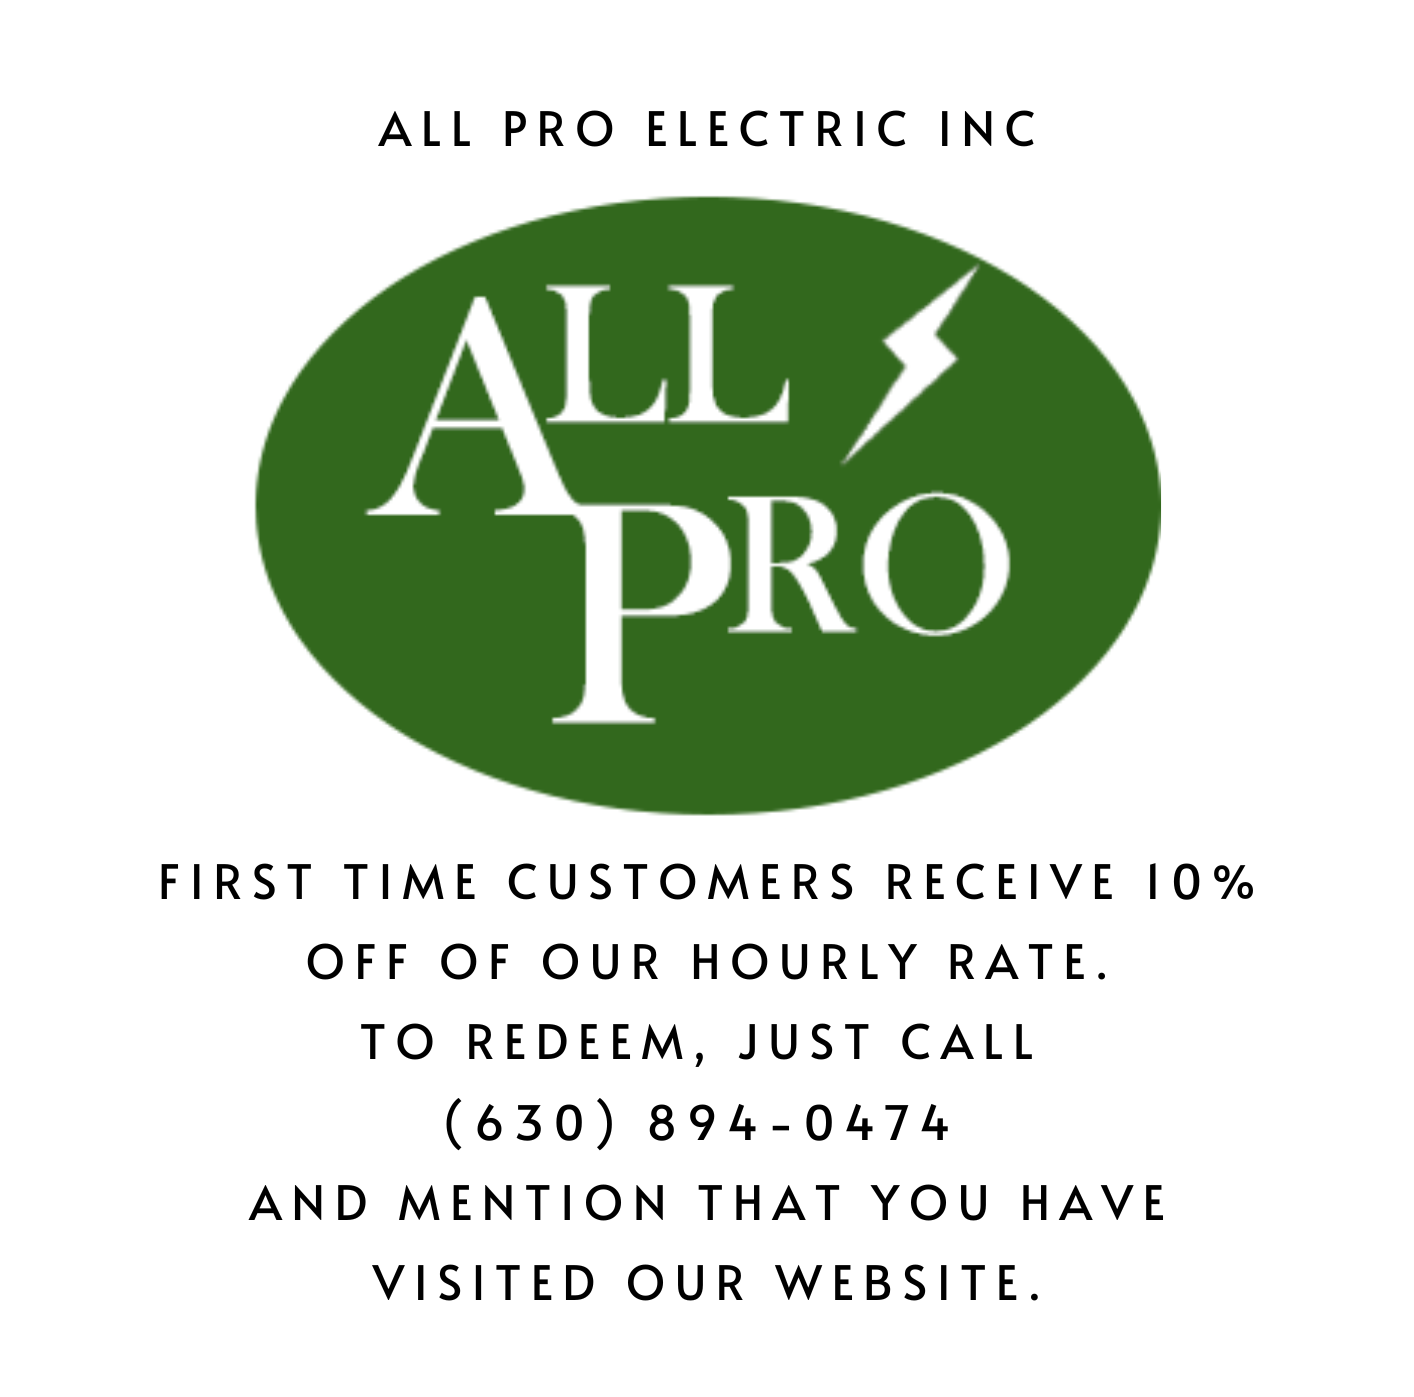 An advertisement for all pro electric inc that says first time customers receive 10 % off of our hourly rate